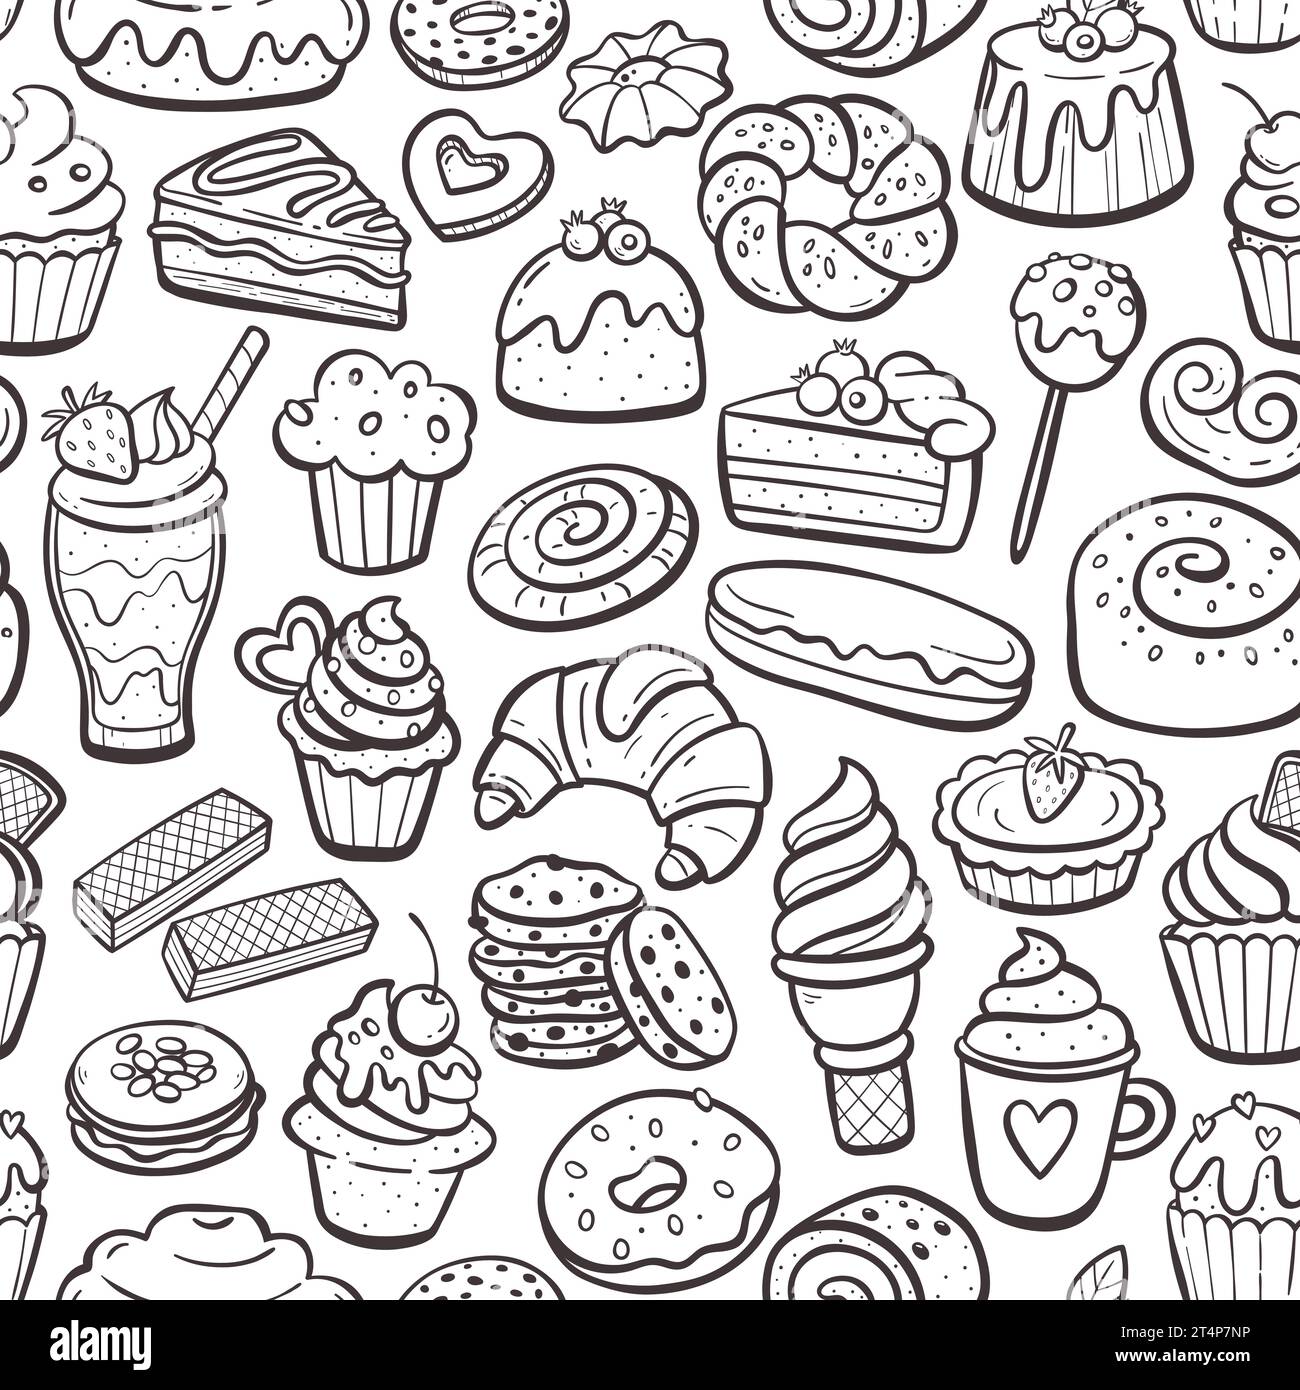 Dessert products seamless pattern. Cupcakes, sweets and pastries. Hand-drawn illustration. Isolated doodle items. Repeat pattern. Vector illustration. Stock Vector